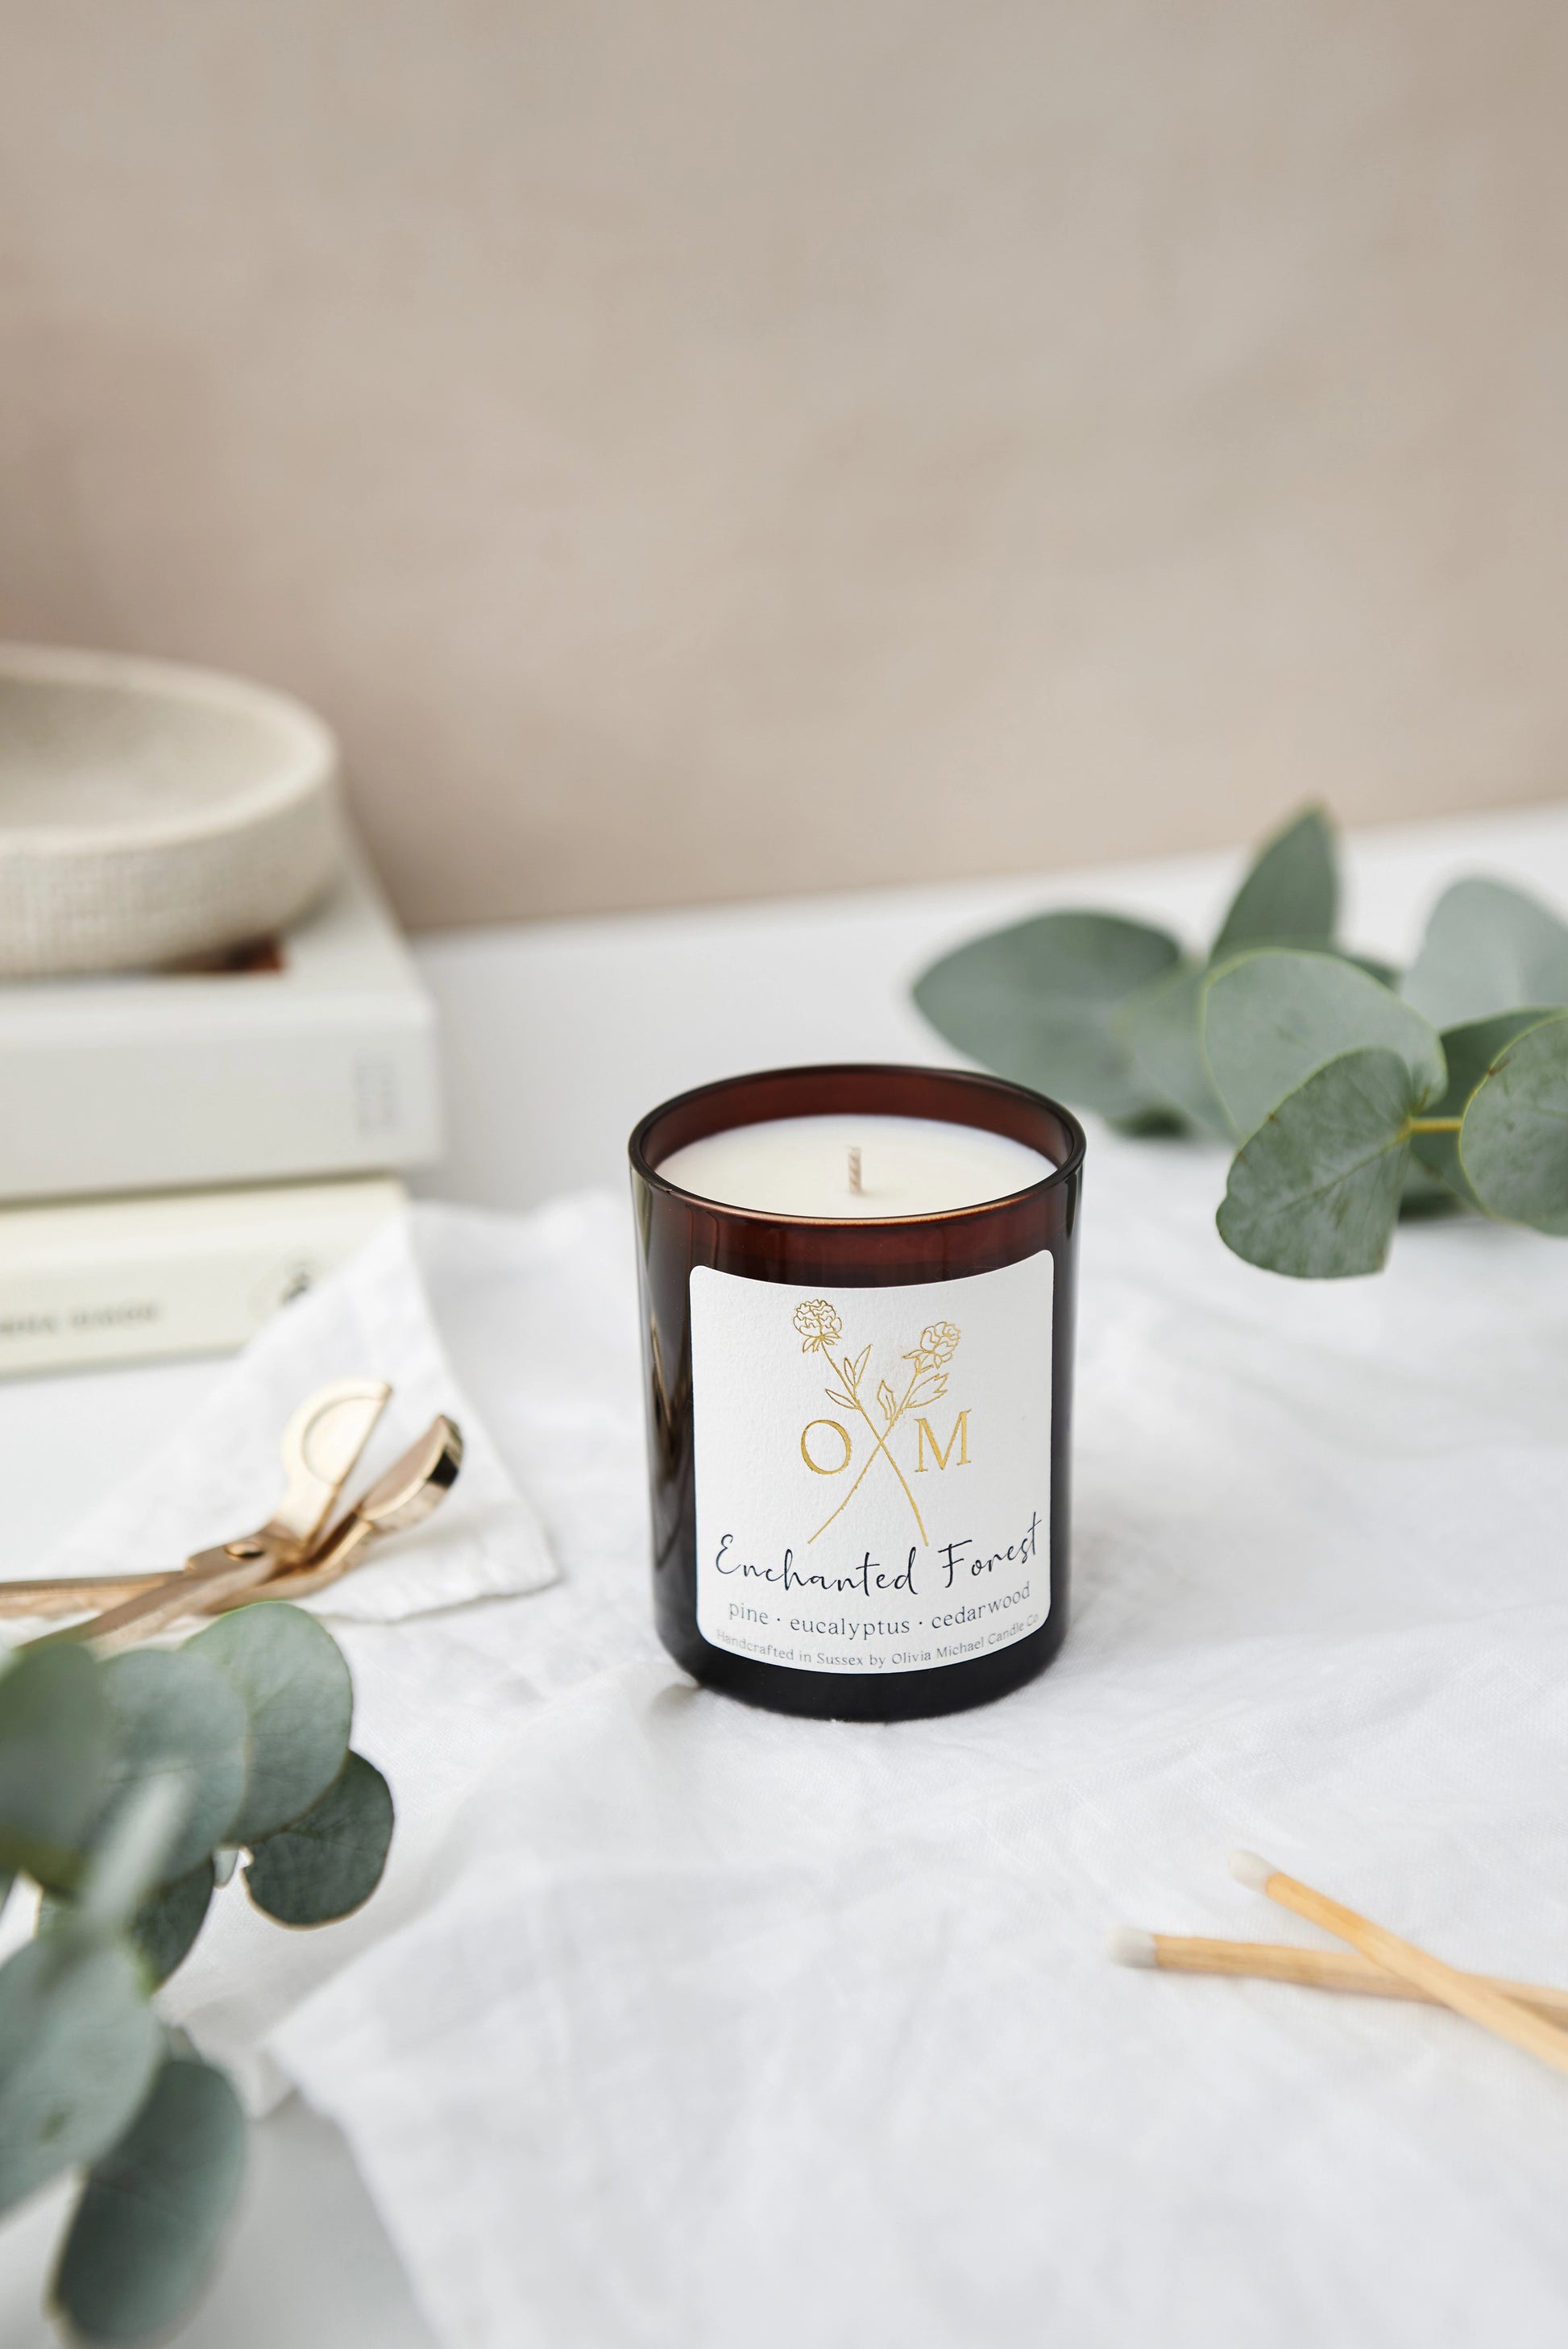 Our Enchanted Forest scented candle is lit and on display in an amber glass jar.